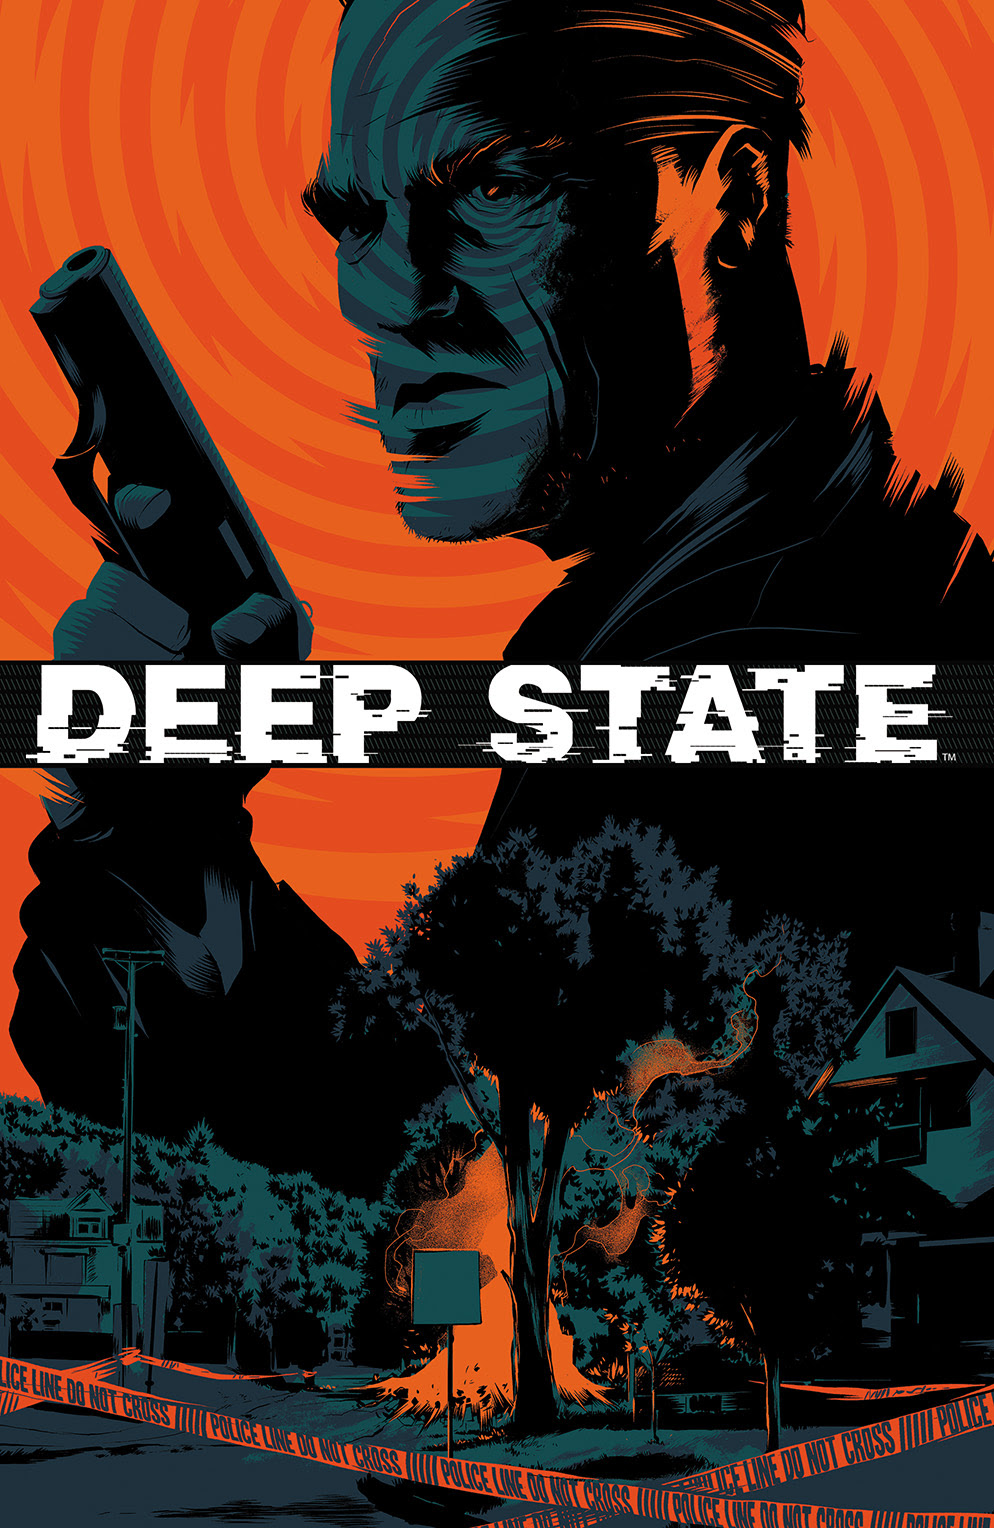 DEEP STATE #2 Cover A by Matt Taylor